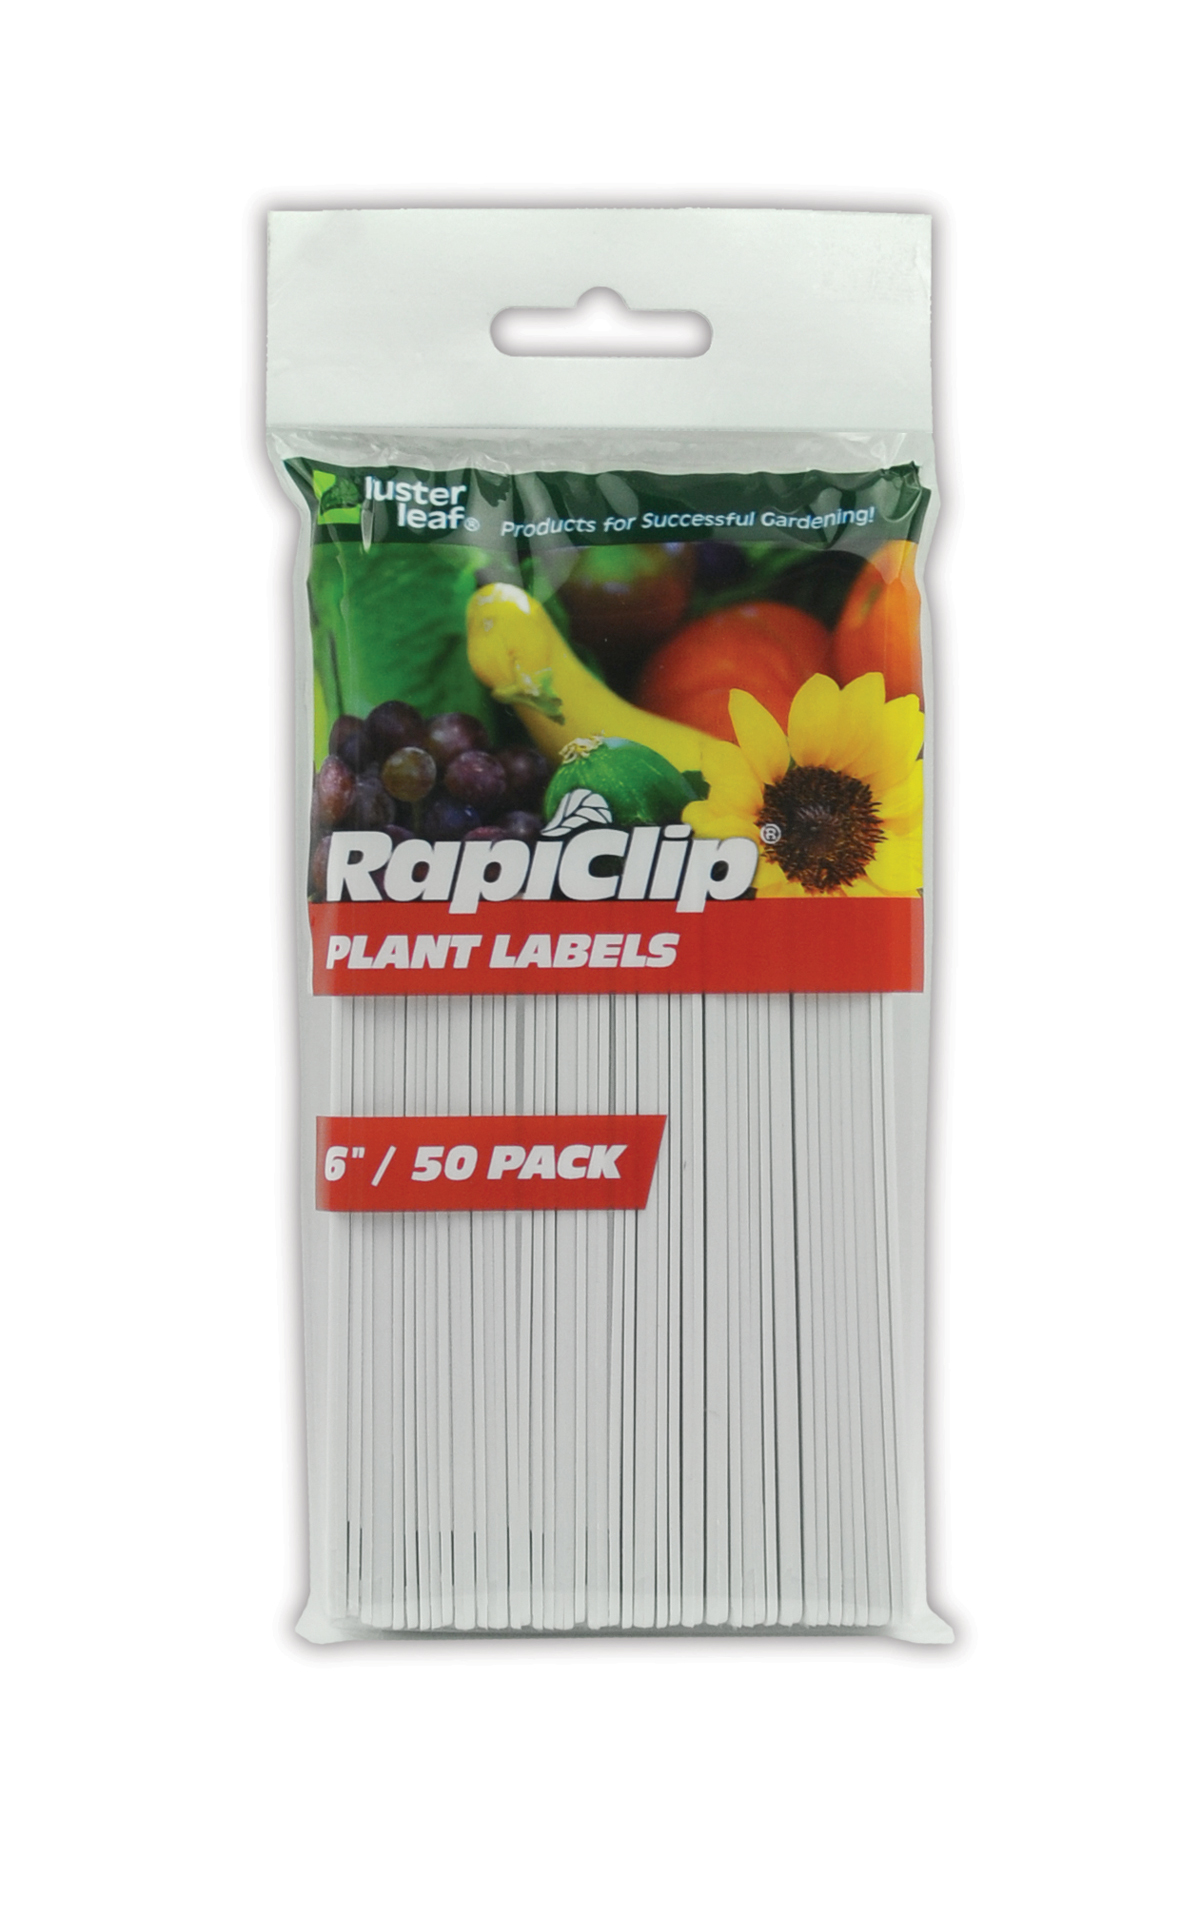 RAPITEST COPPER GARDEN PLANT FLOWER 10" LABEL STAKES MARKERS 25 PACK WITH PEN 